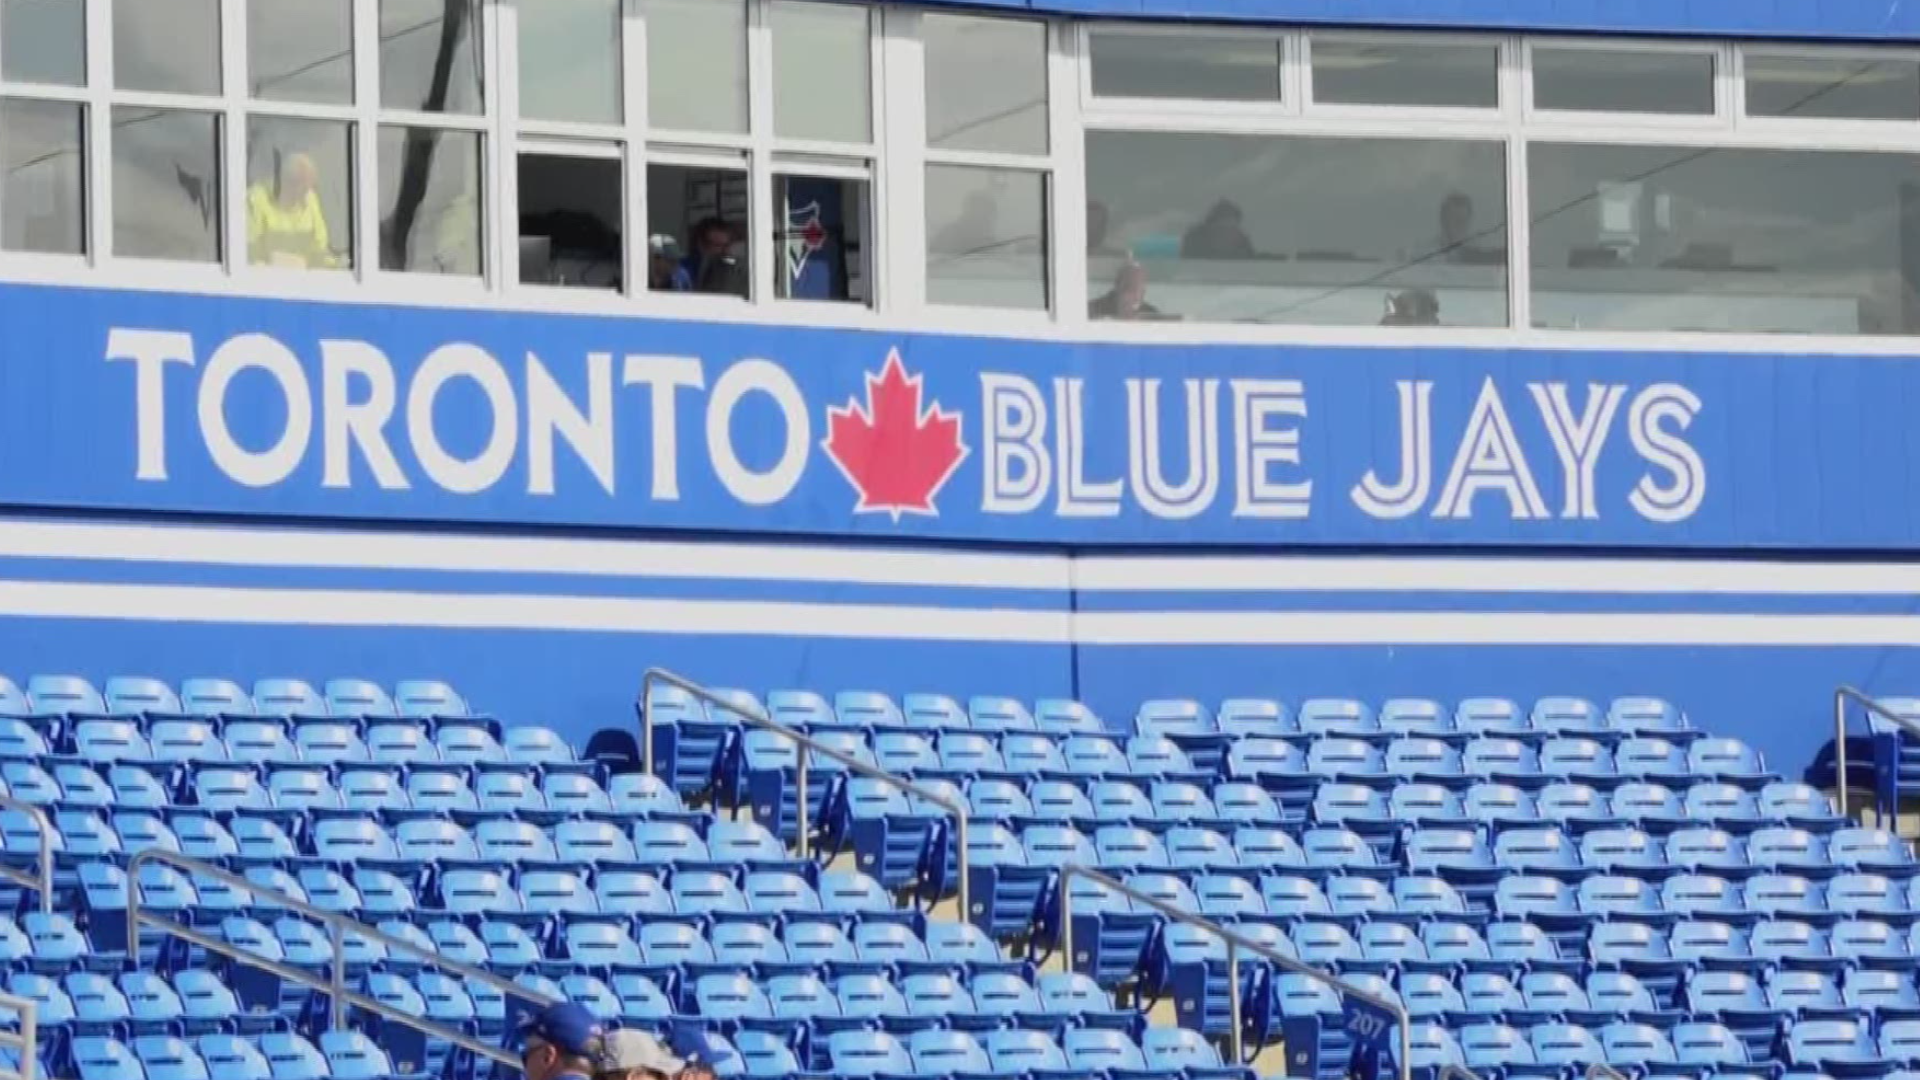 Blue Jays Can't Play Games in Canada Because of Pandemic - The New